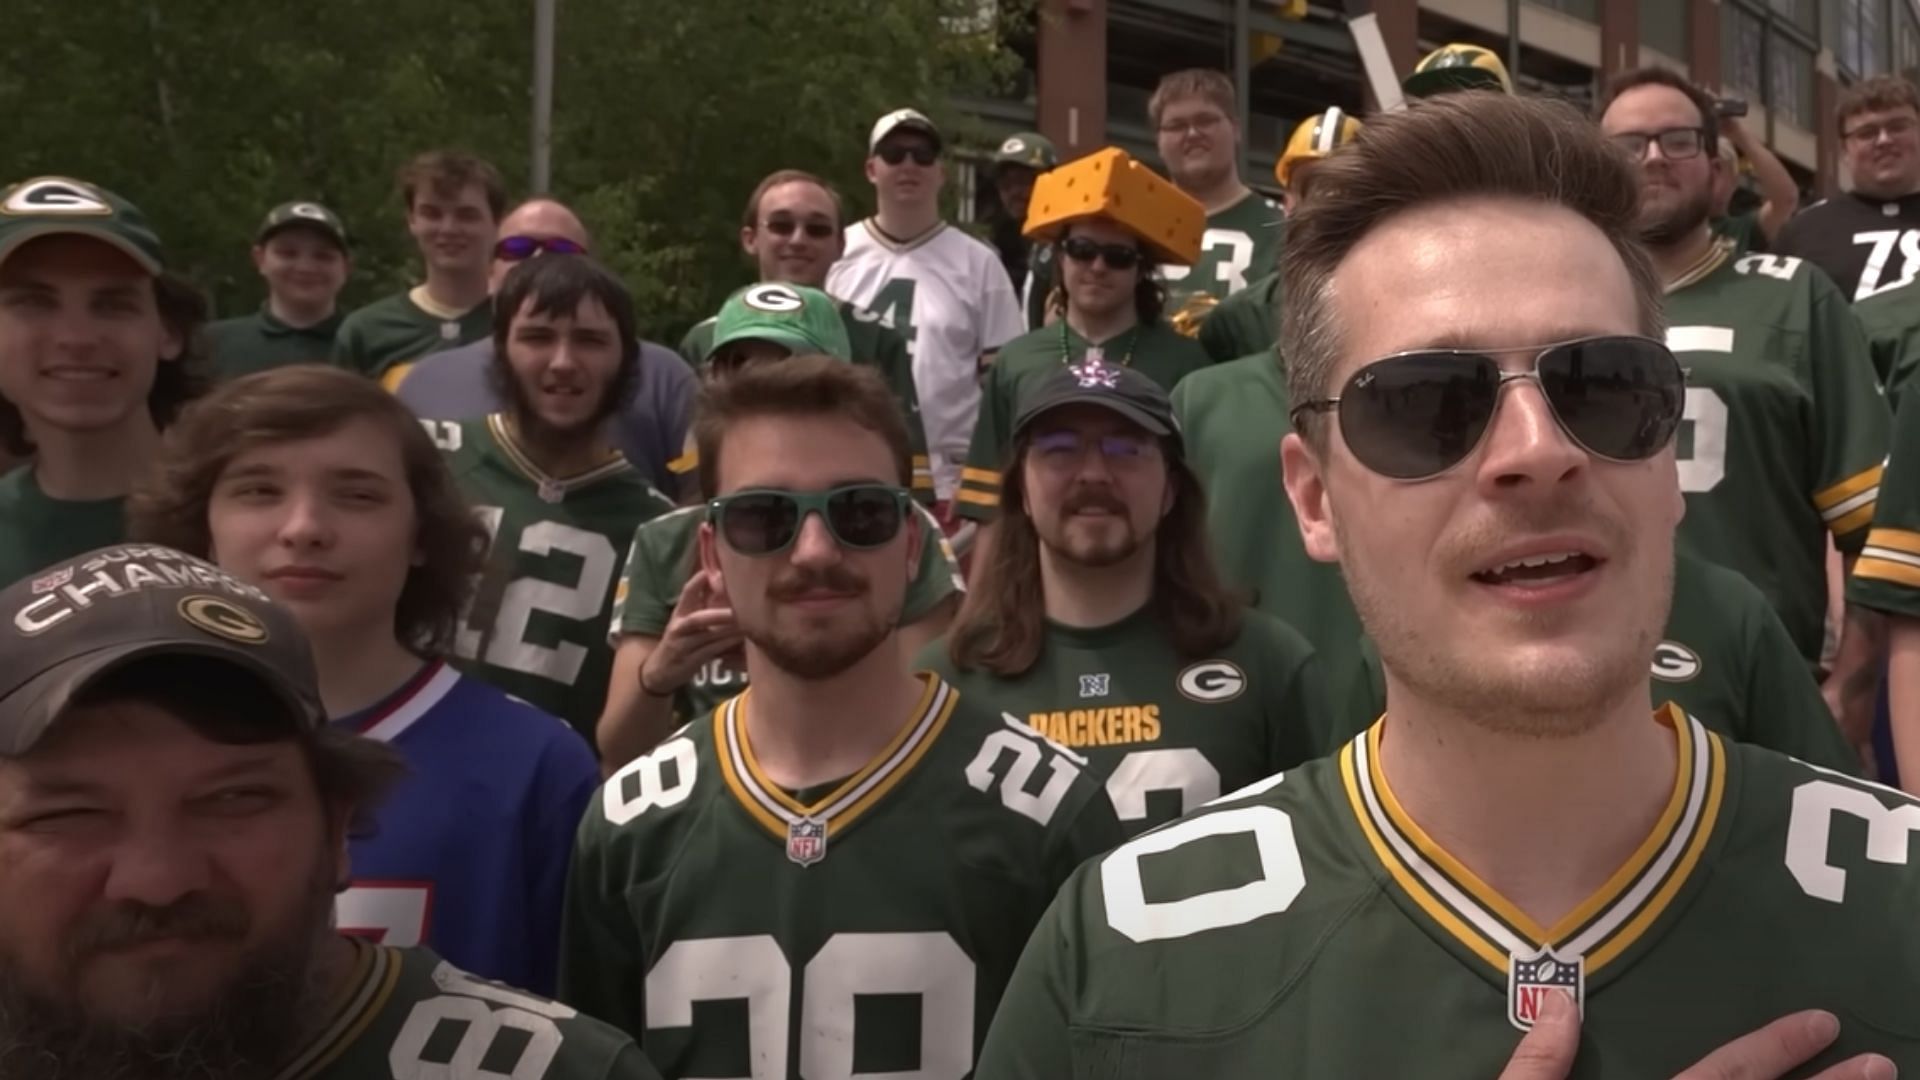 YouTuber Tom Grossi (right foreground, with shades) spent time with Green Bay Packers fans outside Lambeau Field during Day 1 of his 30 NFL Stadiums in 30 Days Challenge. (Image credit: Tom Grossi/YouTube)